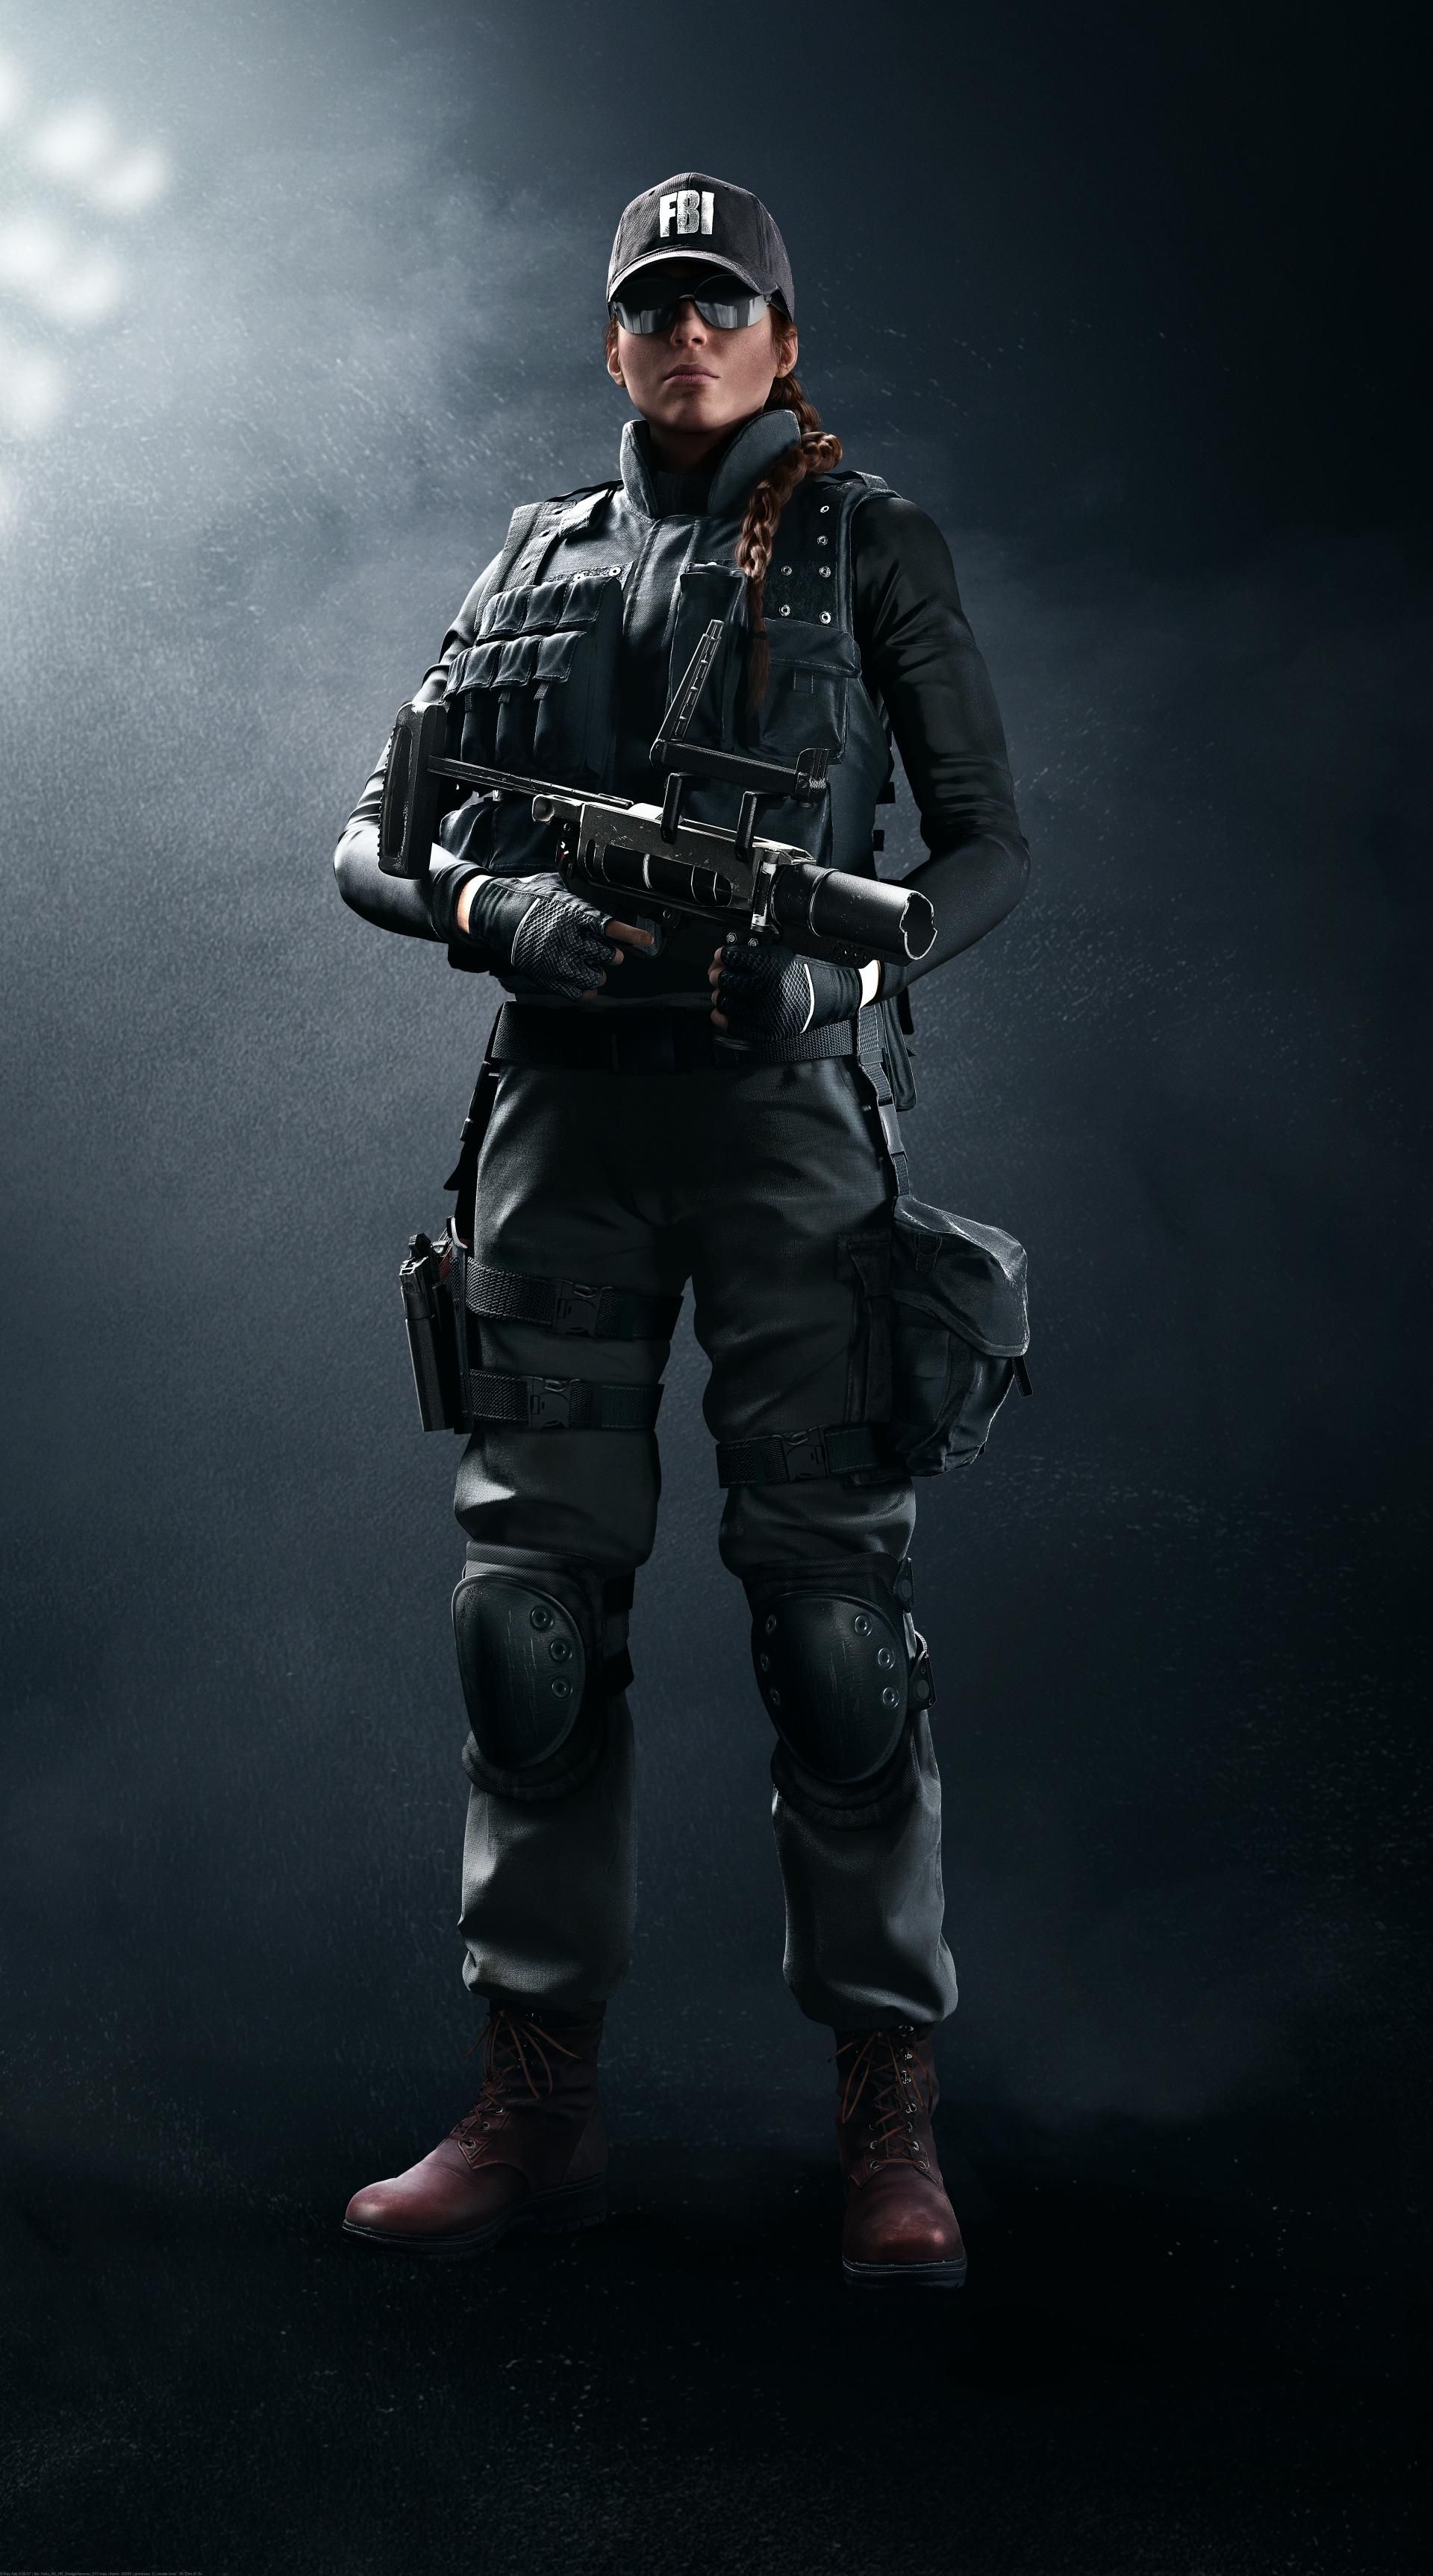 Ash. FBI SWAT. Base Game Operator. Special M120 CREM with 2 breaching rounds. One Armor Three Spee. Rainbow six siege art, Ash rainbow six, Rainbow six siege ash